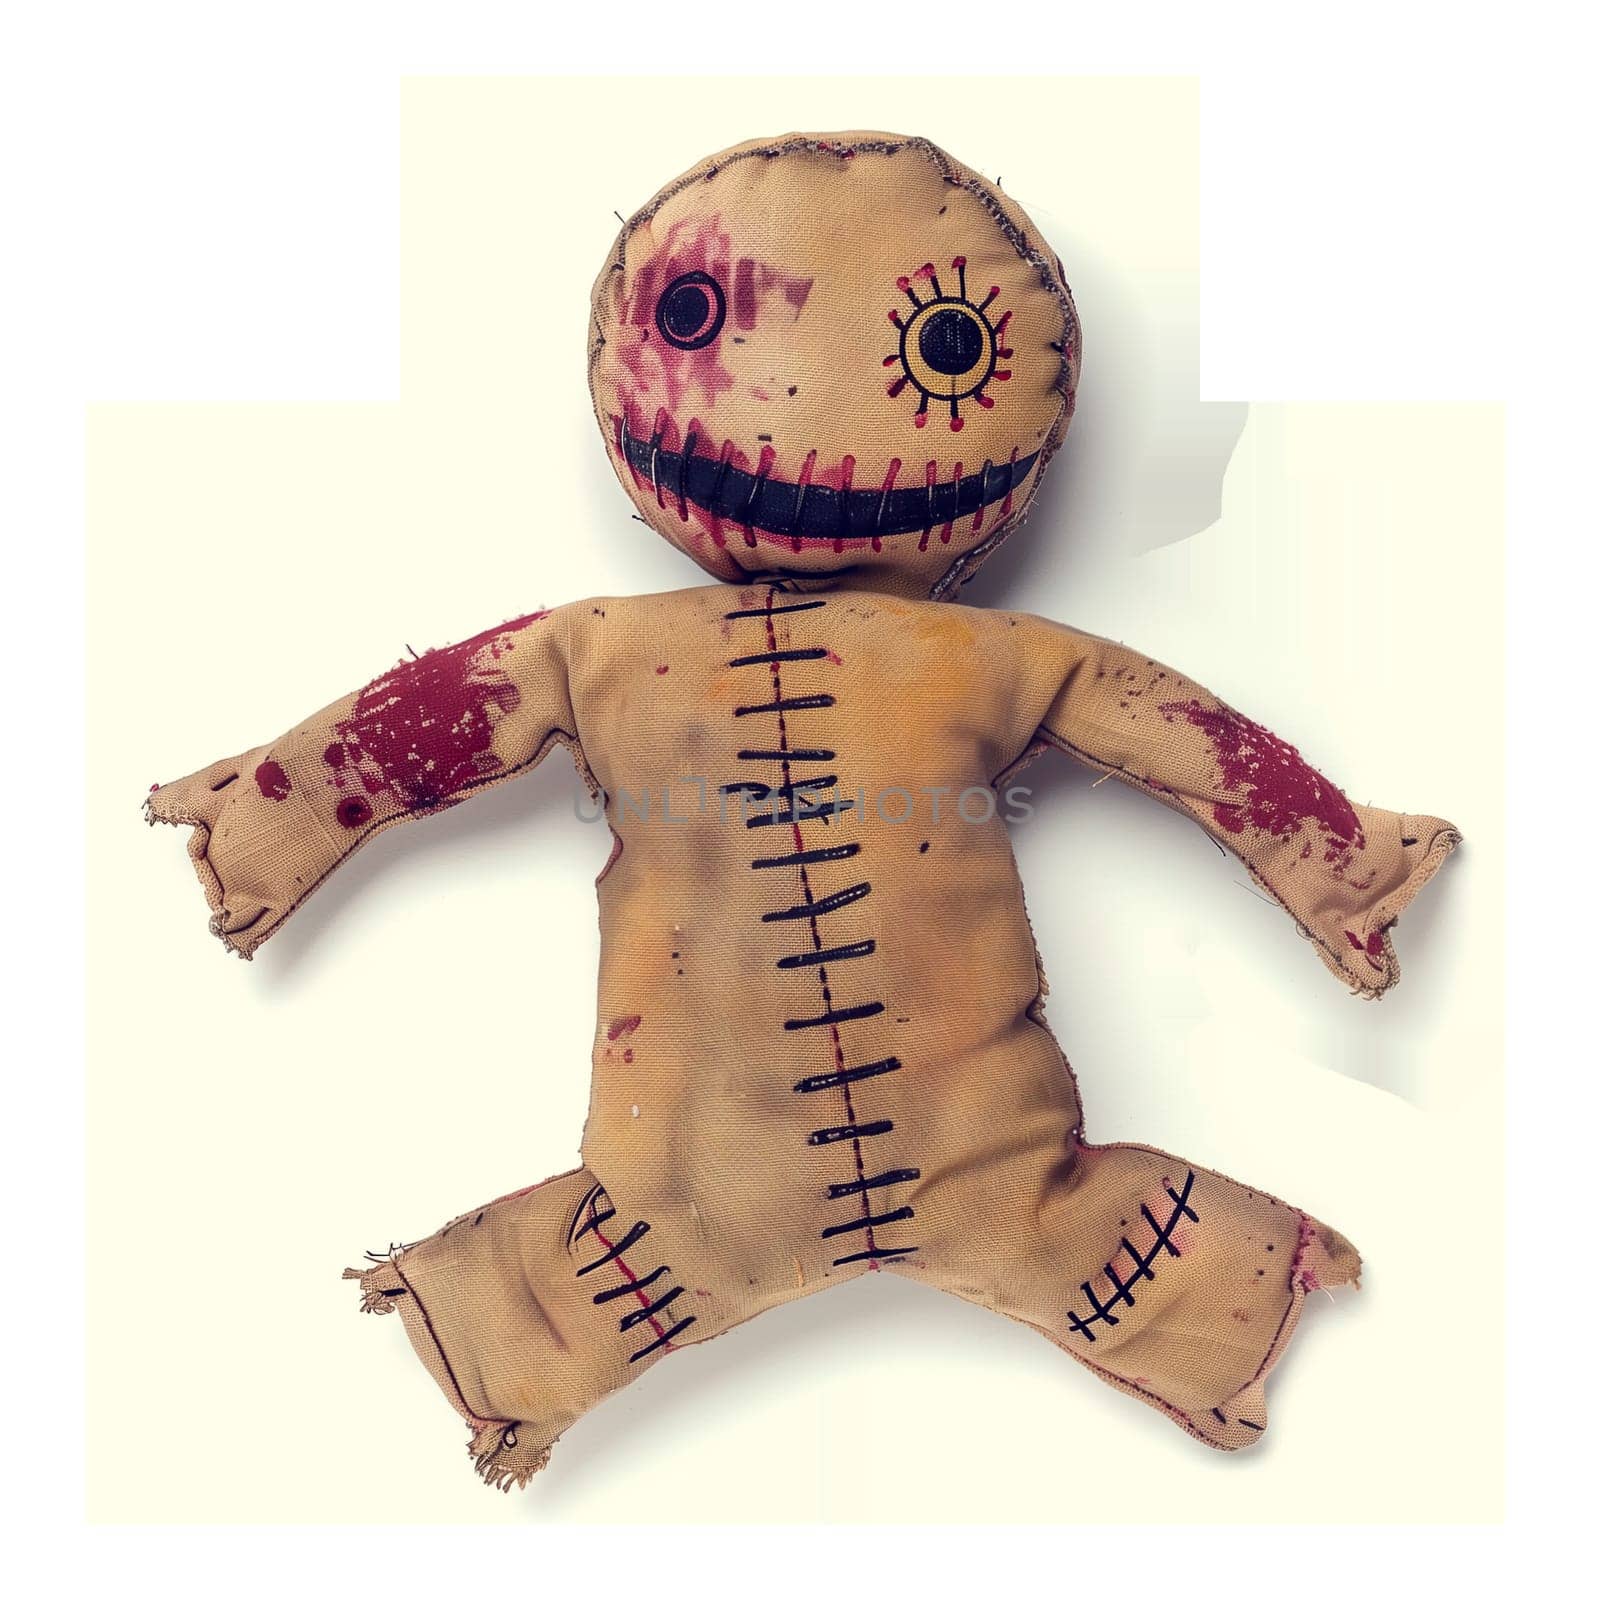 Cut out photo of halloween voodoo doll by Dustick